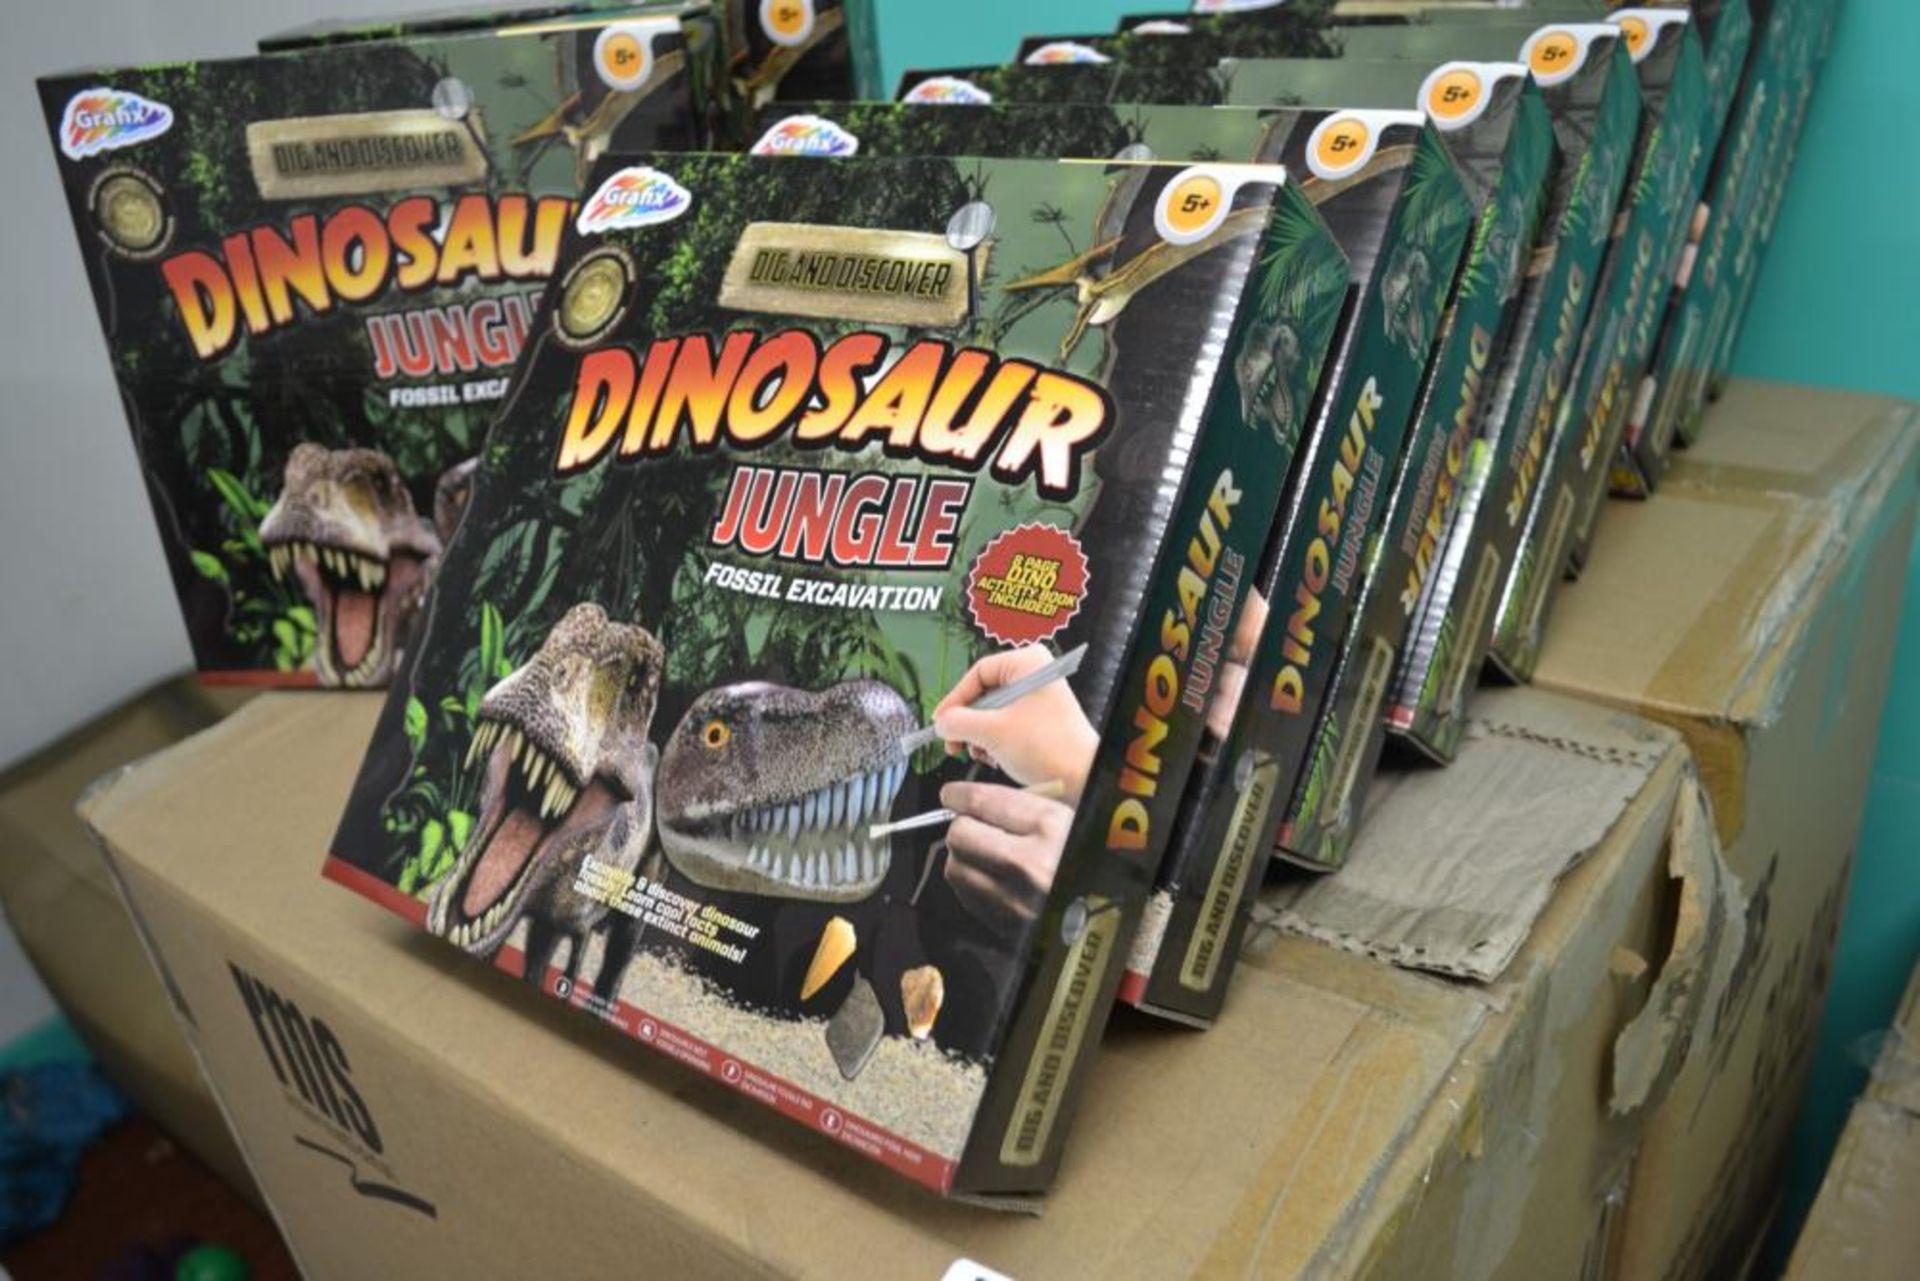 33 x Dig and Discover Dinosaur Jungle Fossil Excavation Sets By Grafix - Brand New Stock - BB623 -